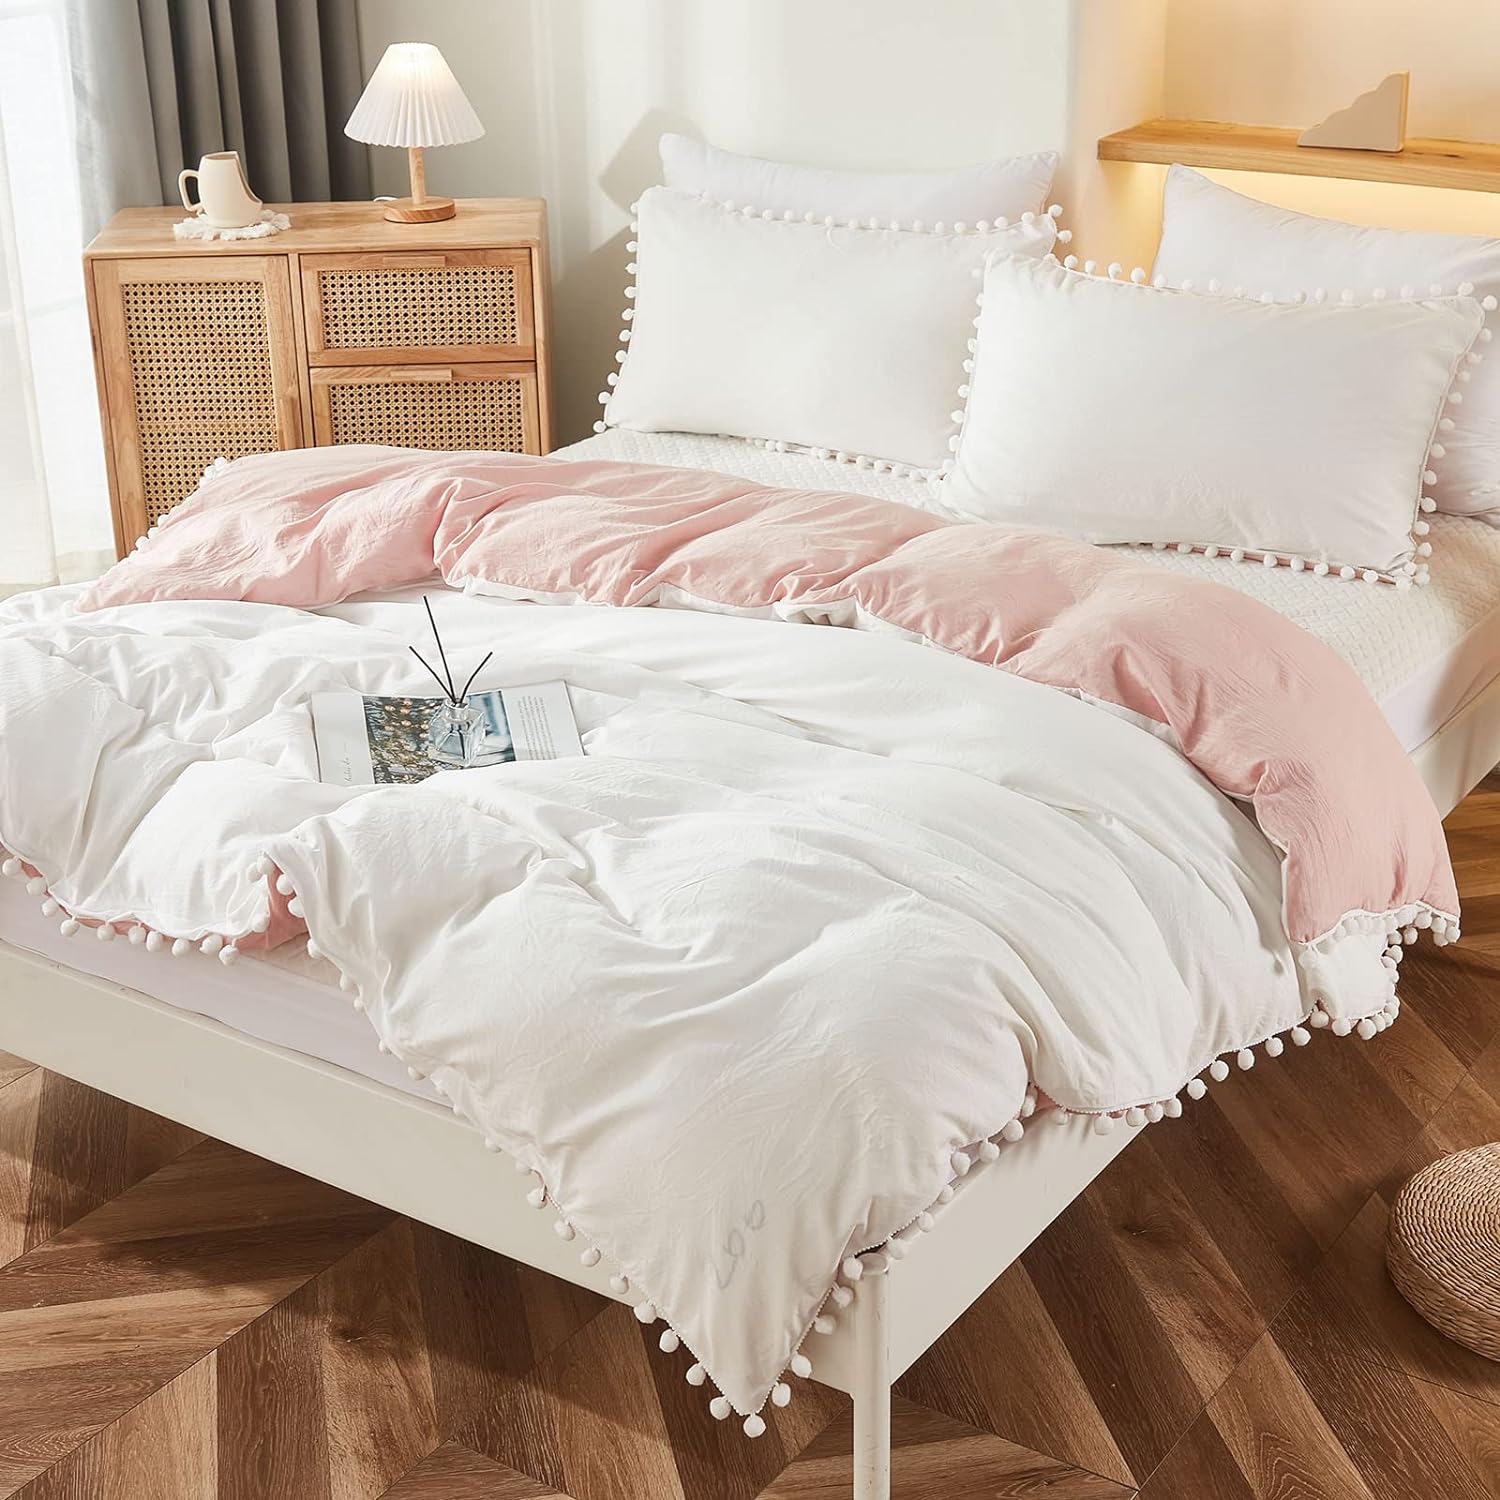 Bedbay Pink Queen Comforter Set Pink Bedding Ultra Soft Breathable 3 Pcs Fluffy Comforter Bed Set for All Season White and Pink Reversible Aesthetic Bedding Set Room Decor(White&Pink,Queen)